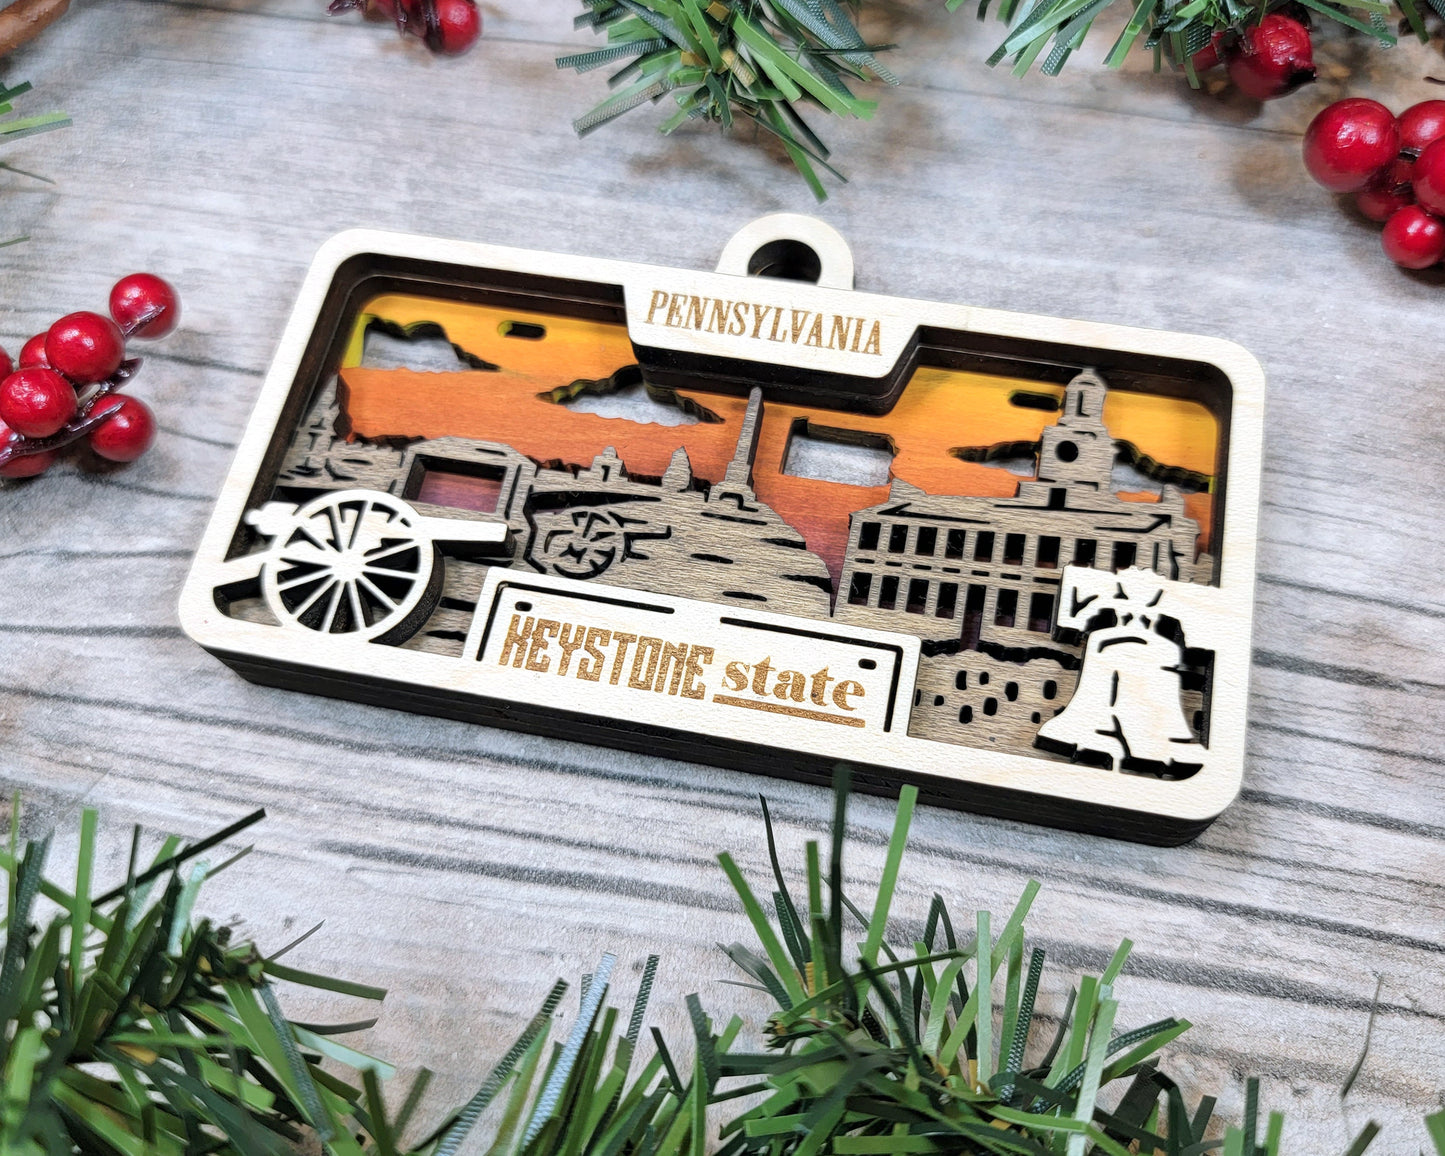 Pennsylvania State Plate Ornament and Signage - SVG File Download - Sized for Glowforge - Laser Ready Digital Files